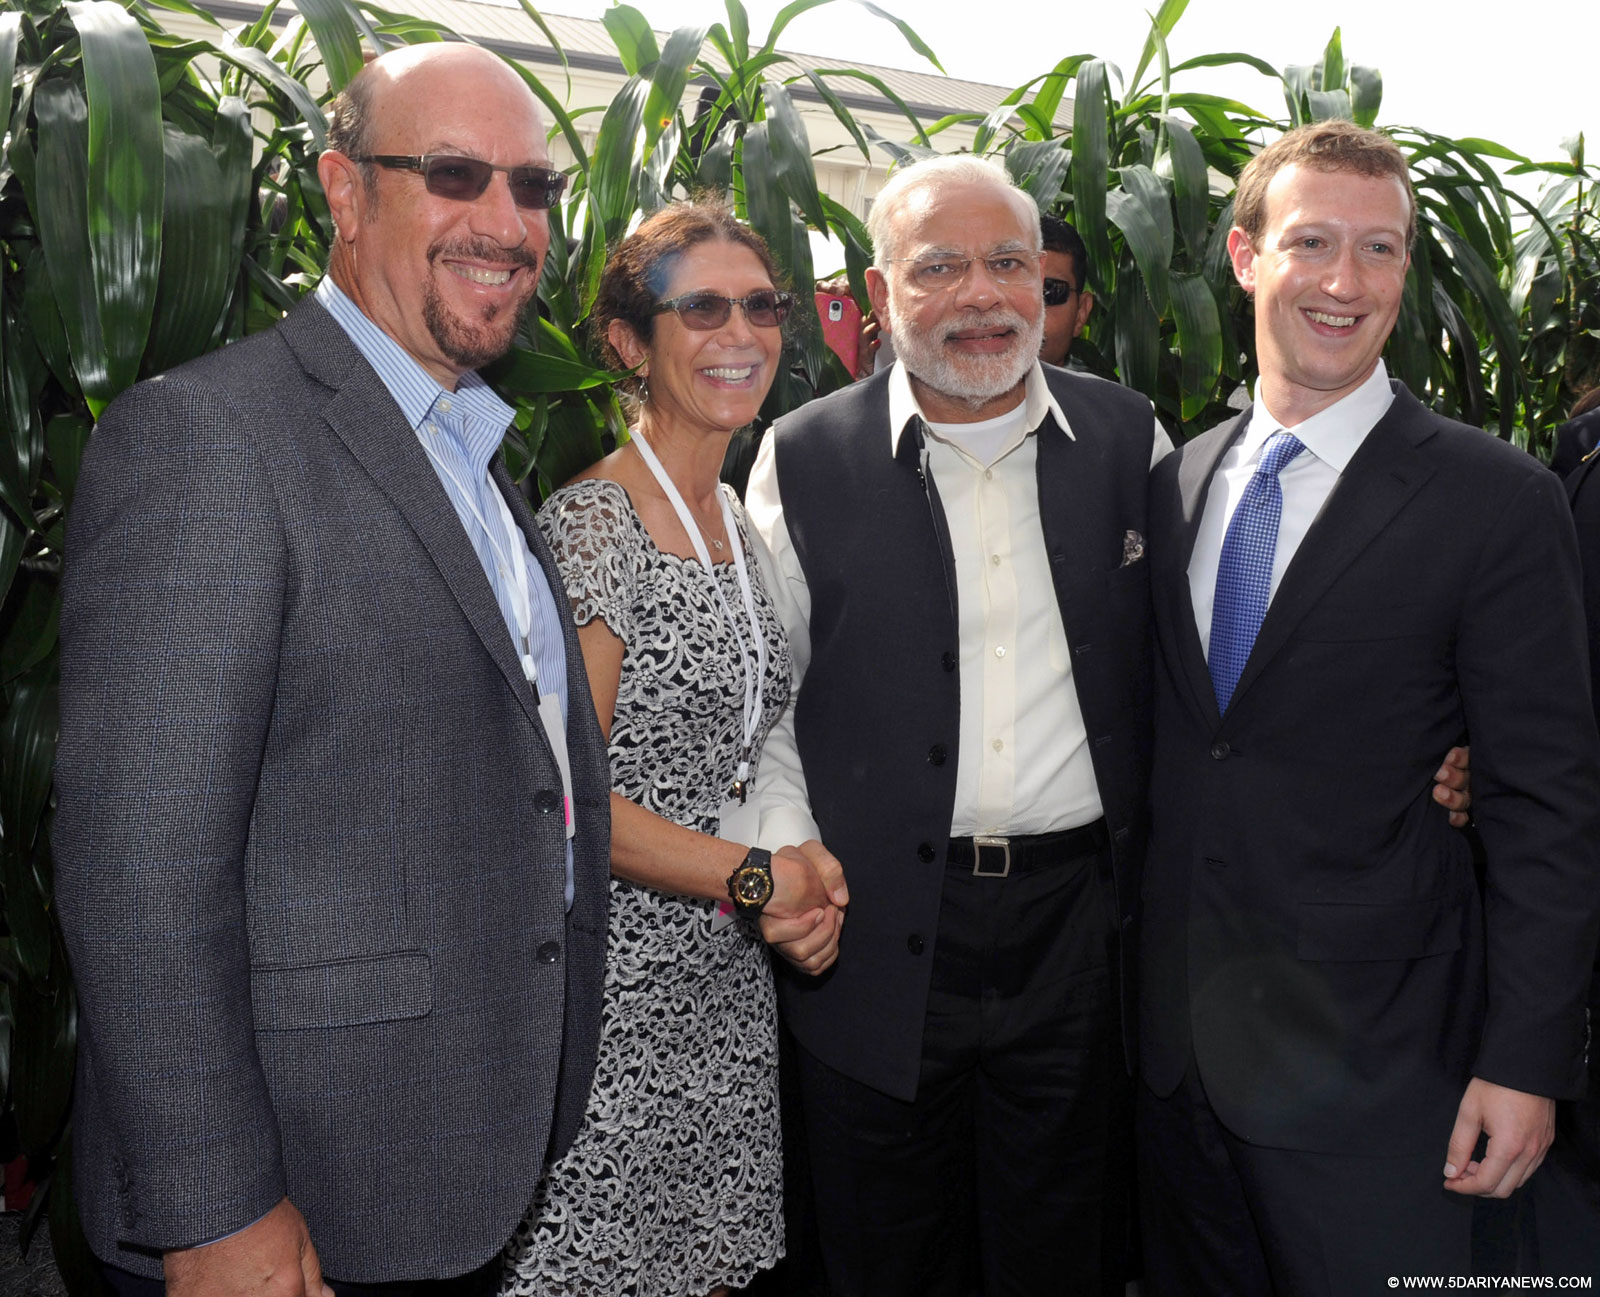 The Prime Minister, Shri Narendra Modi meeting the family of Facebook Chairman and CEO, Mr. Mark Zuckerberg, at Facebook HQ, in San Jose, California on September 27, 2015.